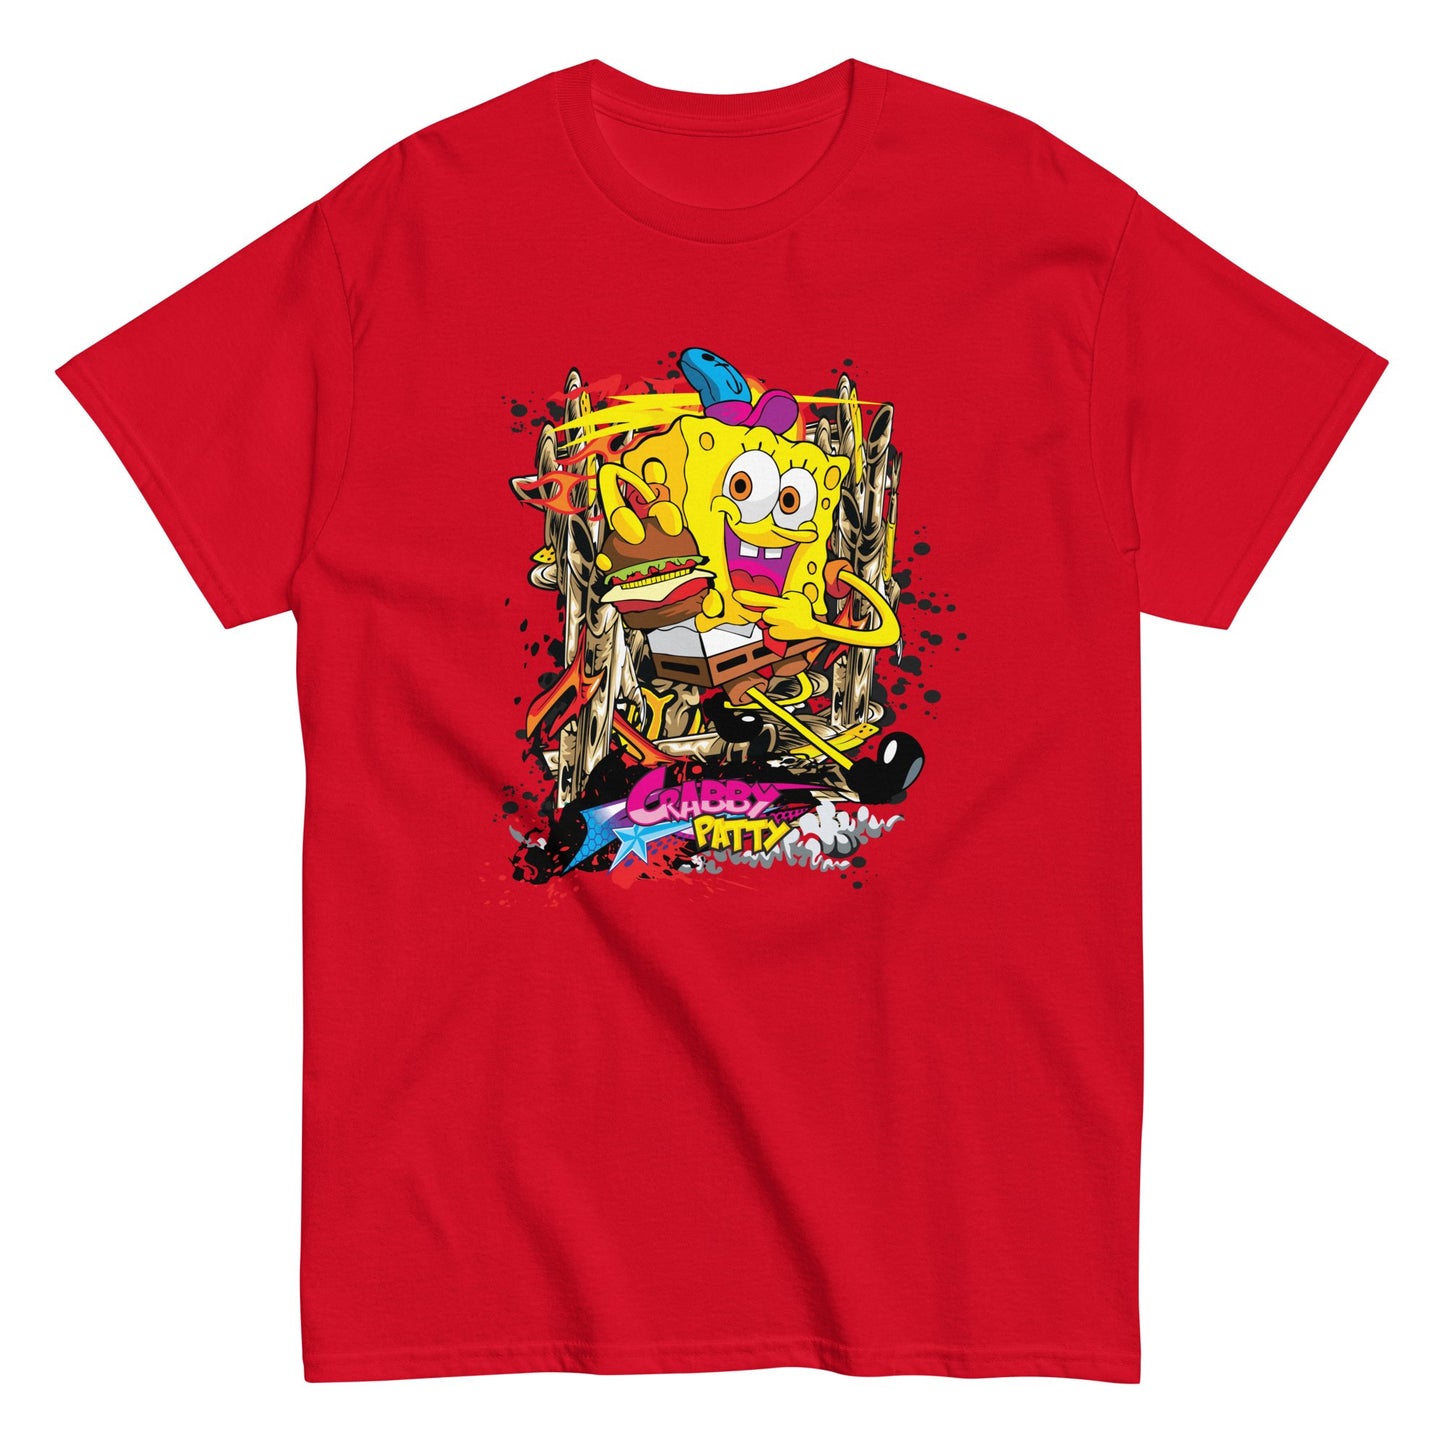 Dive into Nostalgia with Our Exclusive SpongeBob SquarePants Graphic Tee Collection - The Truth Graphics